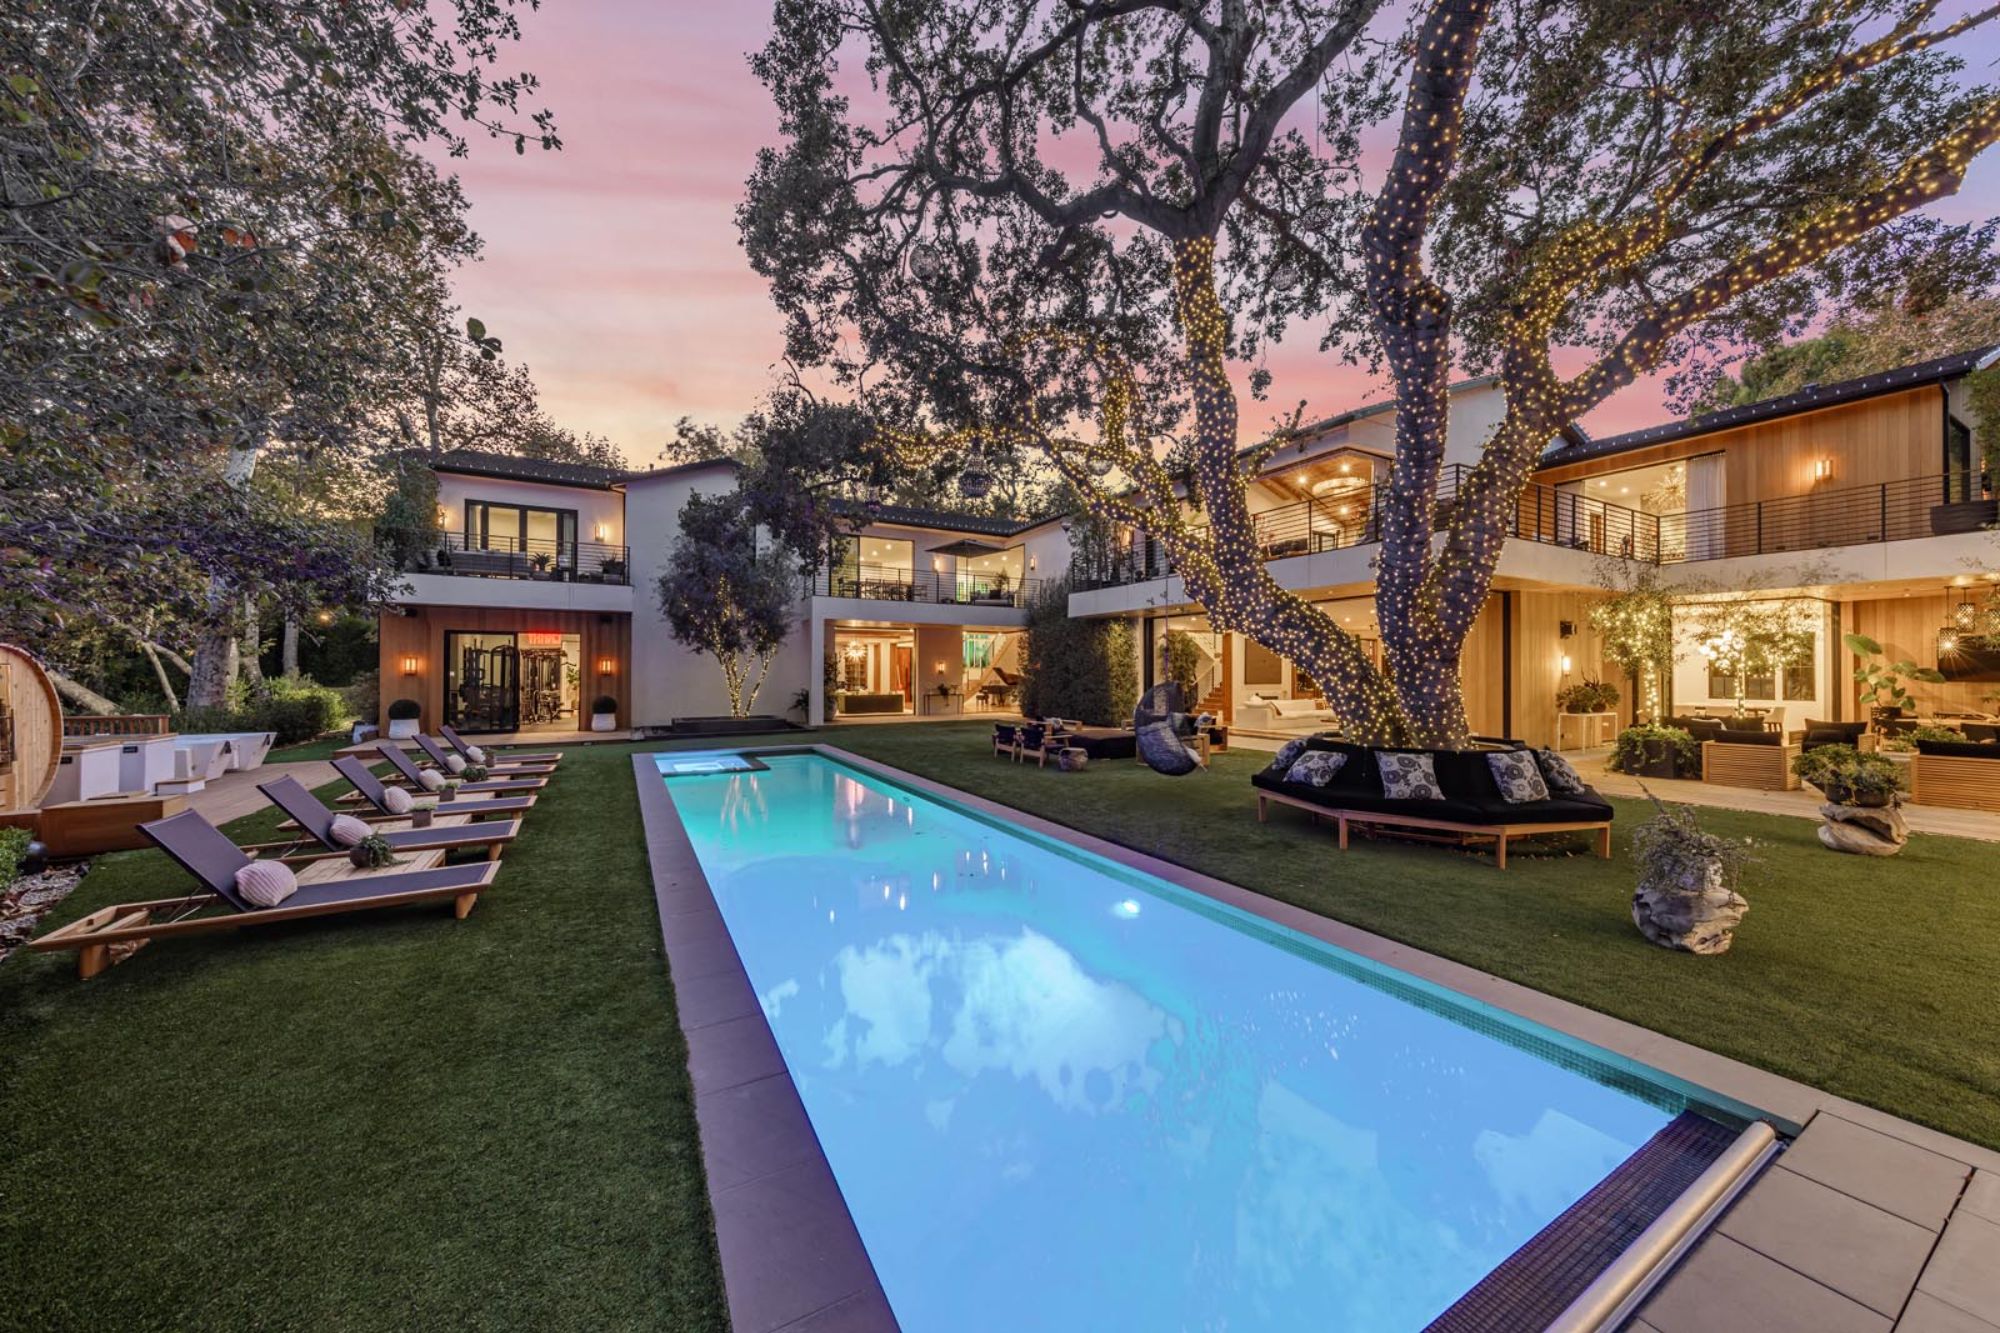 A big californa estate with a fancy pool in its backyard.